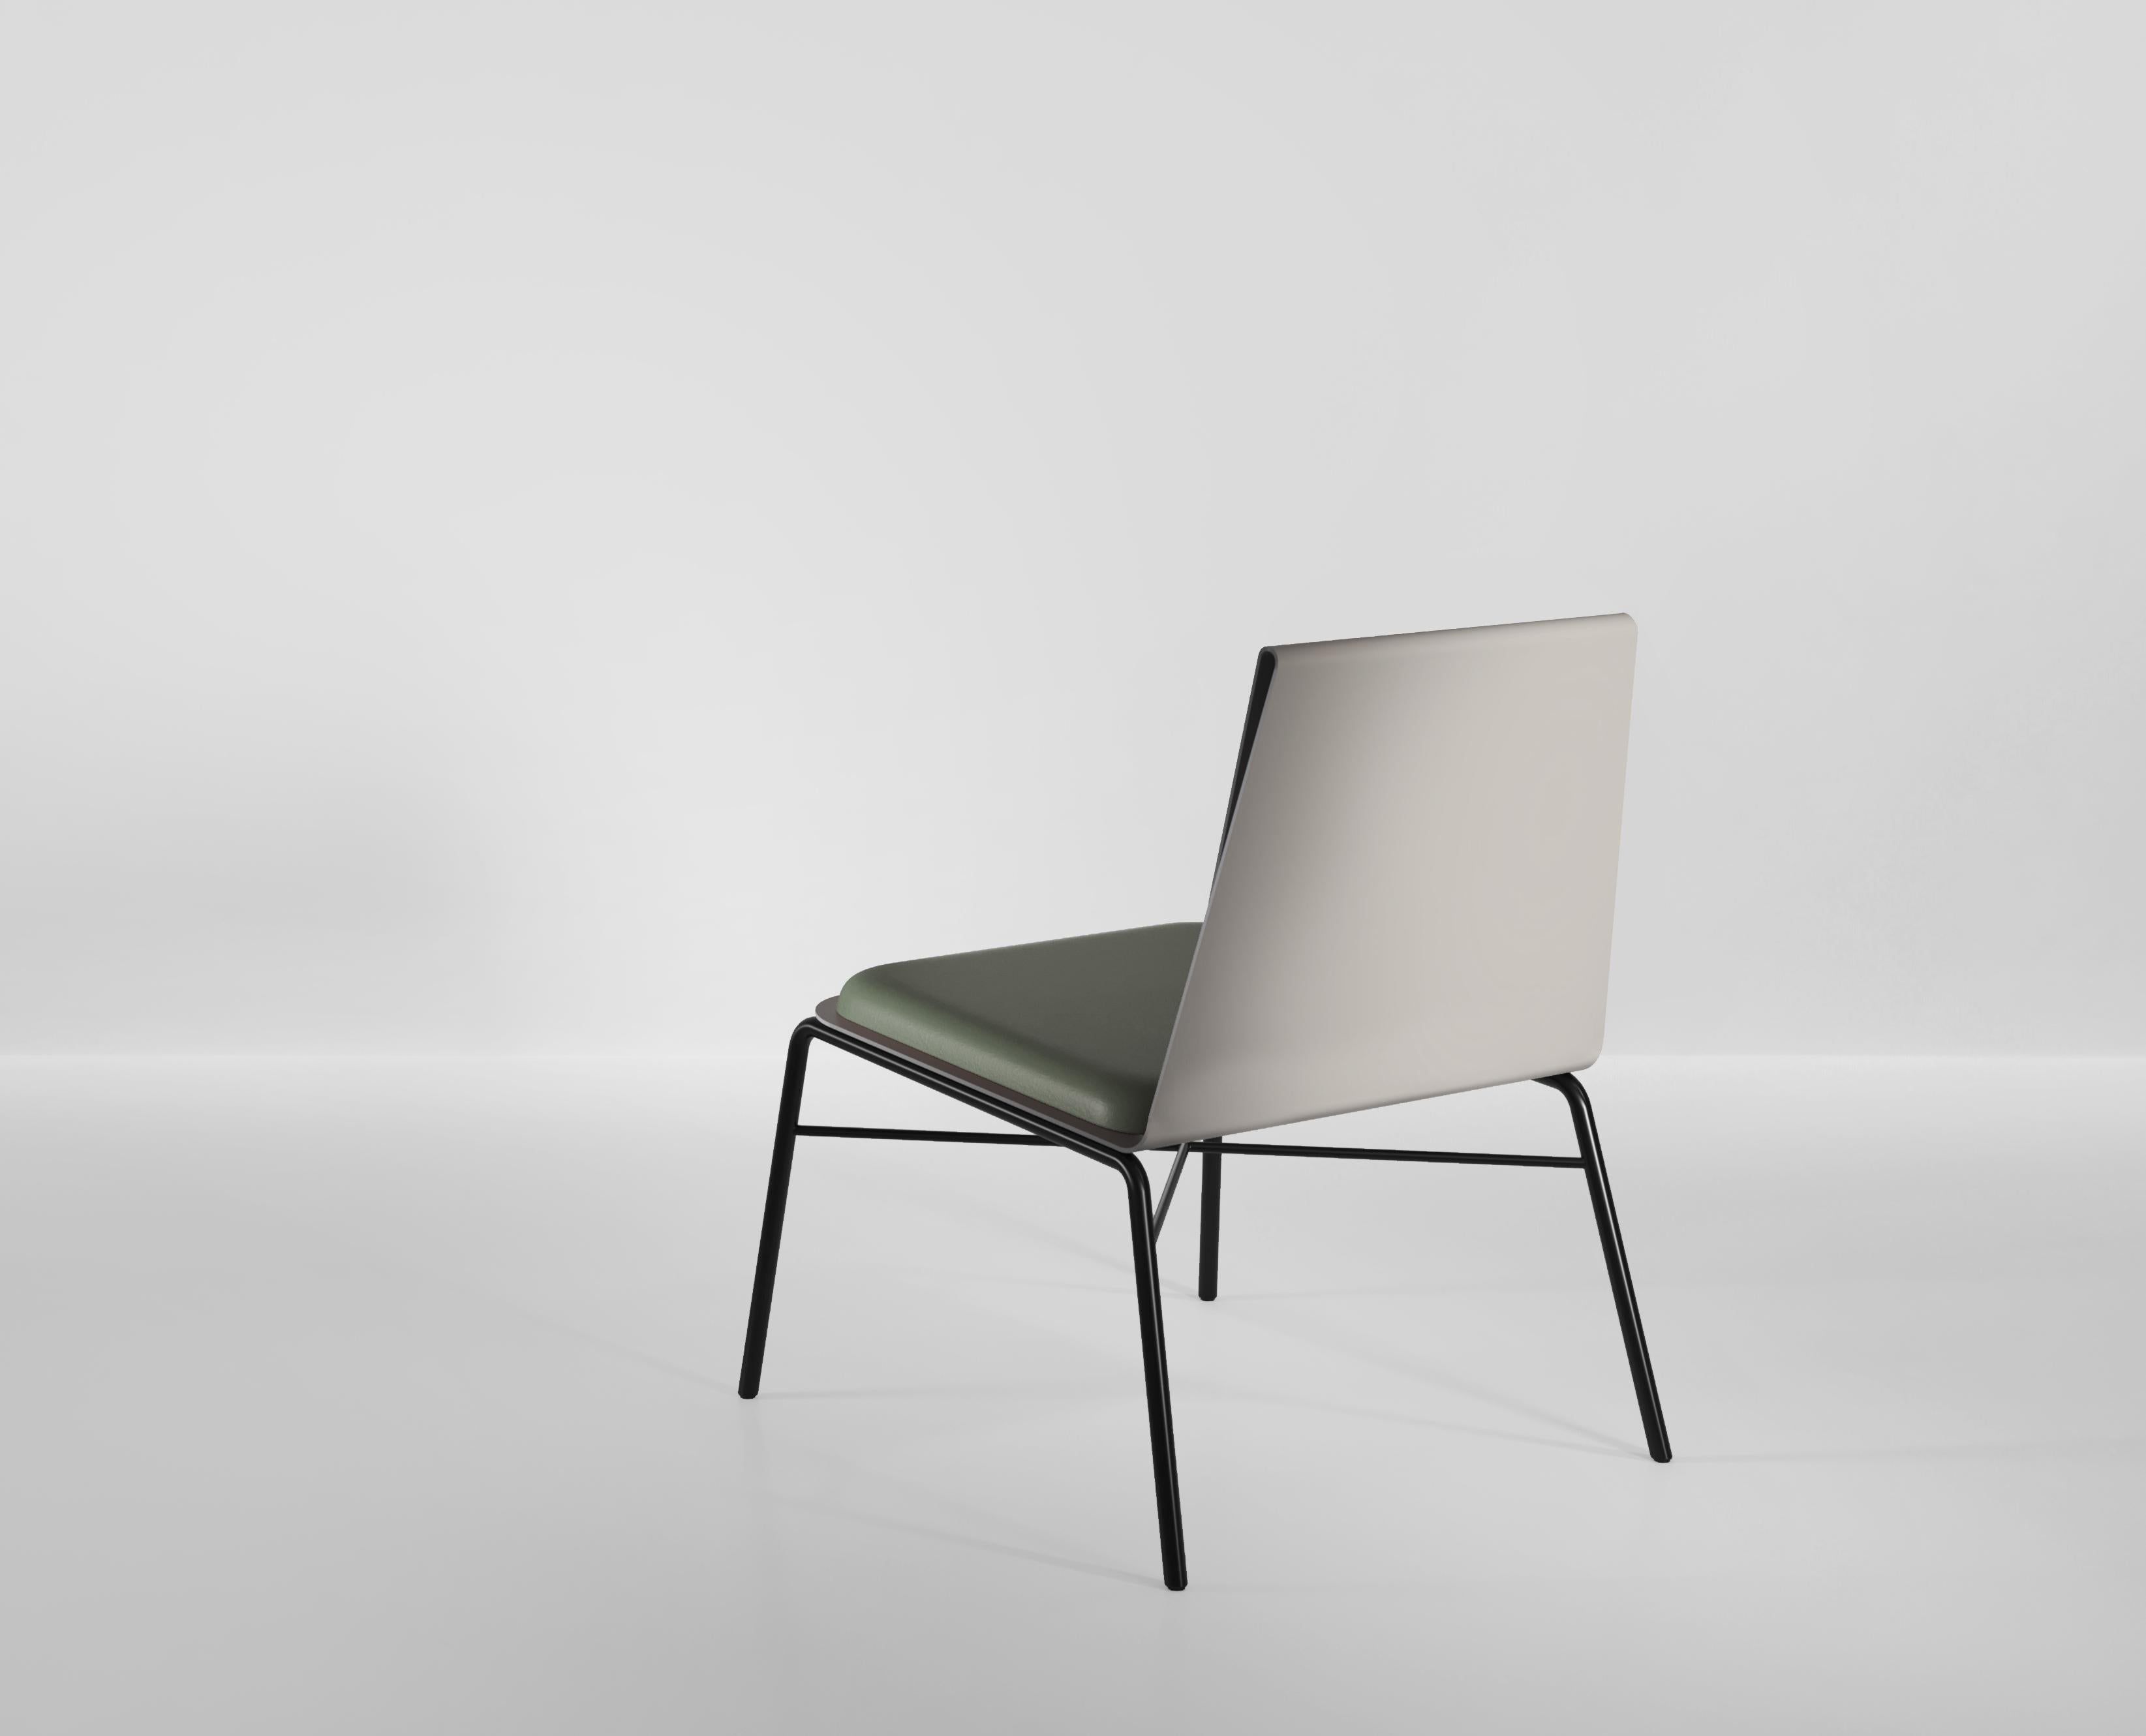 Modern Fold Contemporary Lounge Chair in Metal and Fabric by Artefatto Design Studio